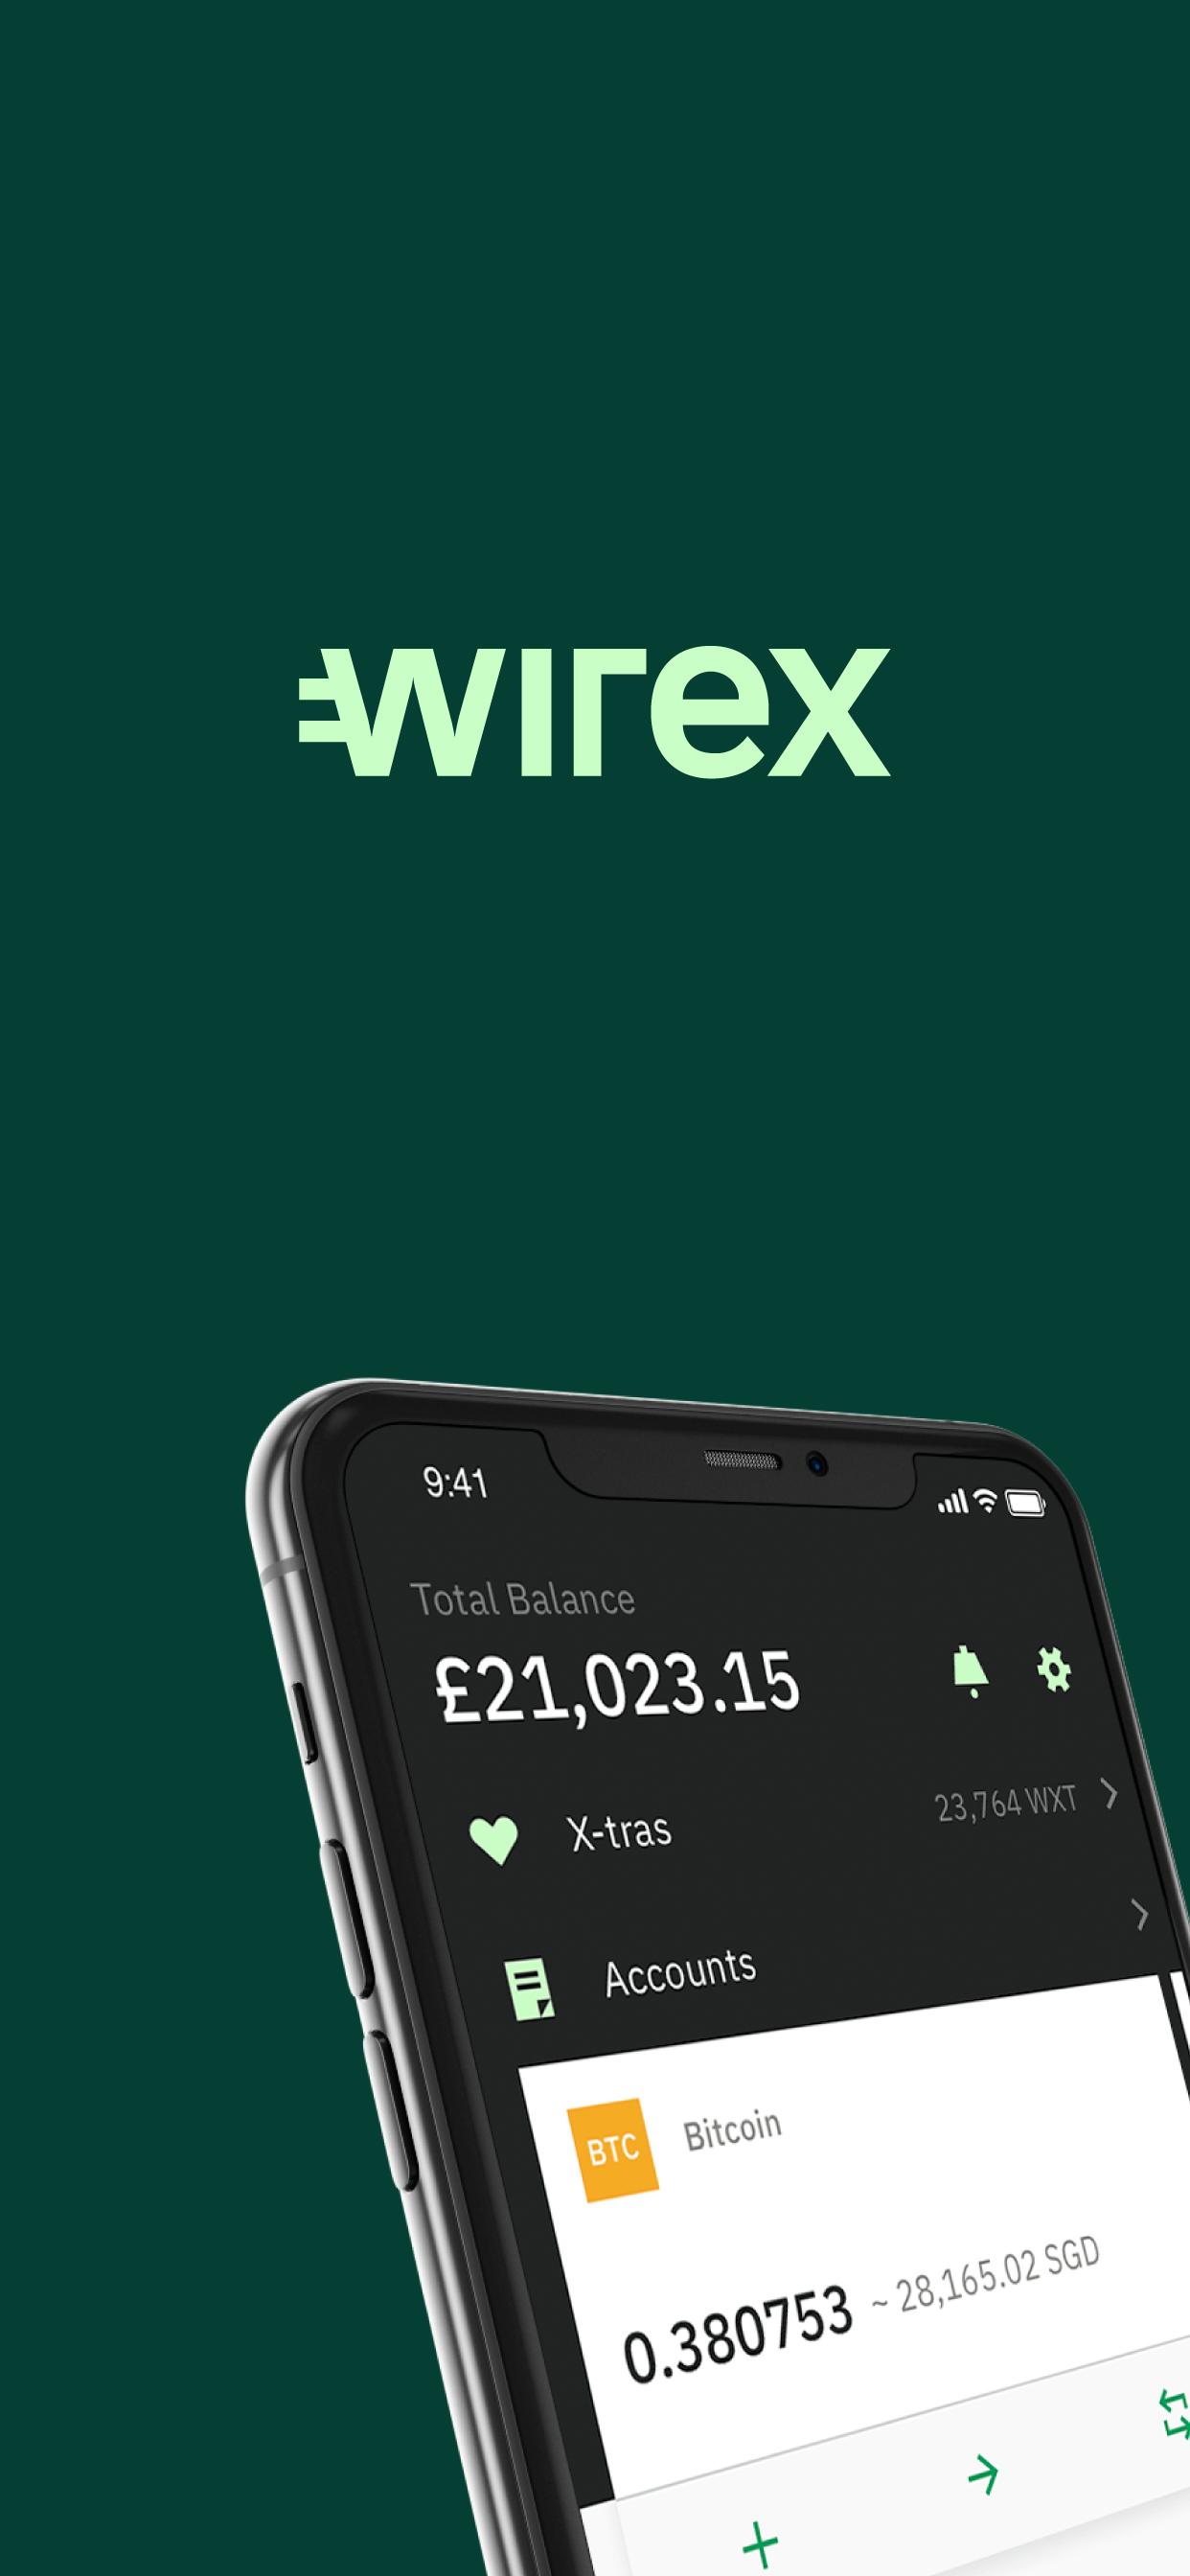 Live chat wirex NXUSD is